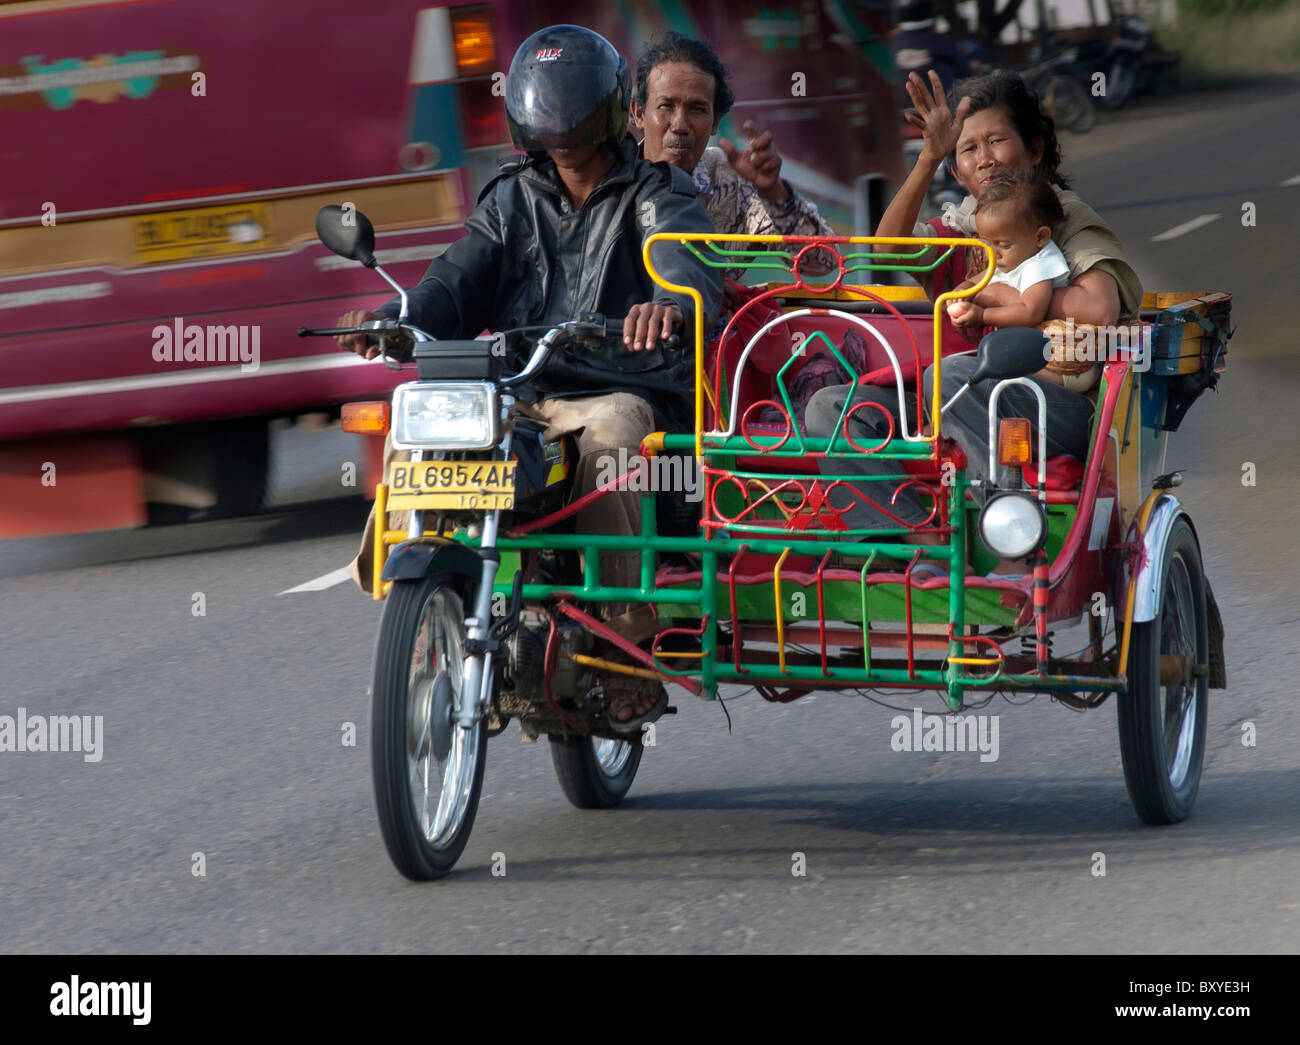 Family travel by motorbike taxi, Indonesia Stock Photo